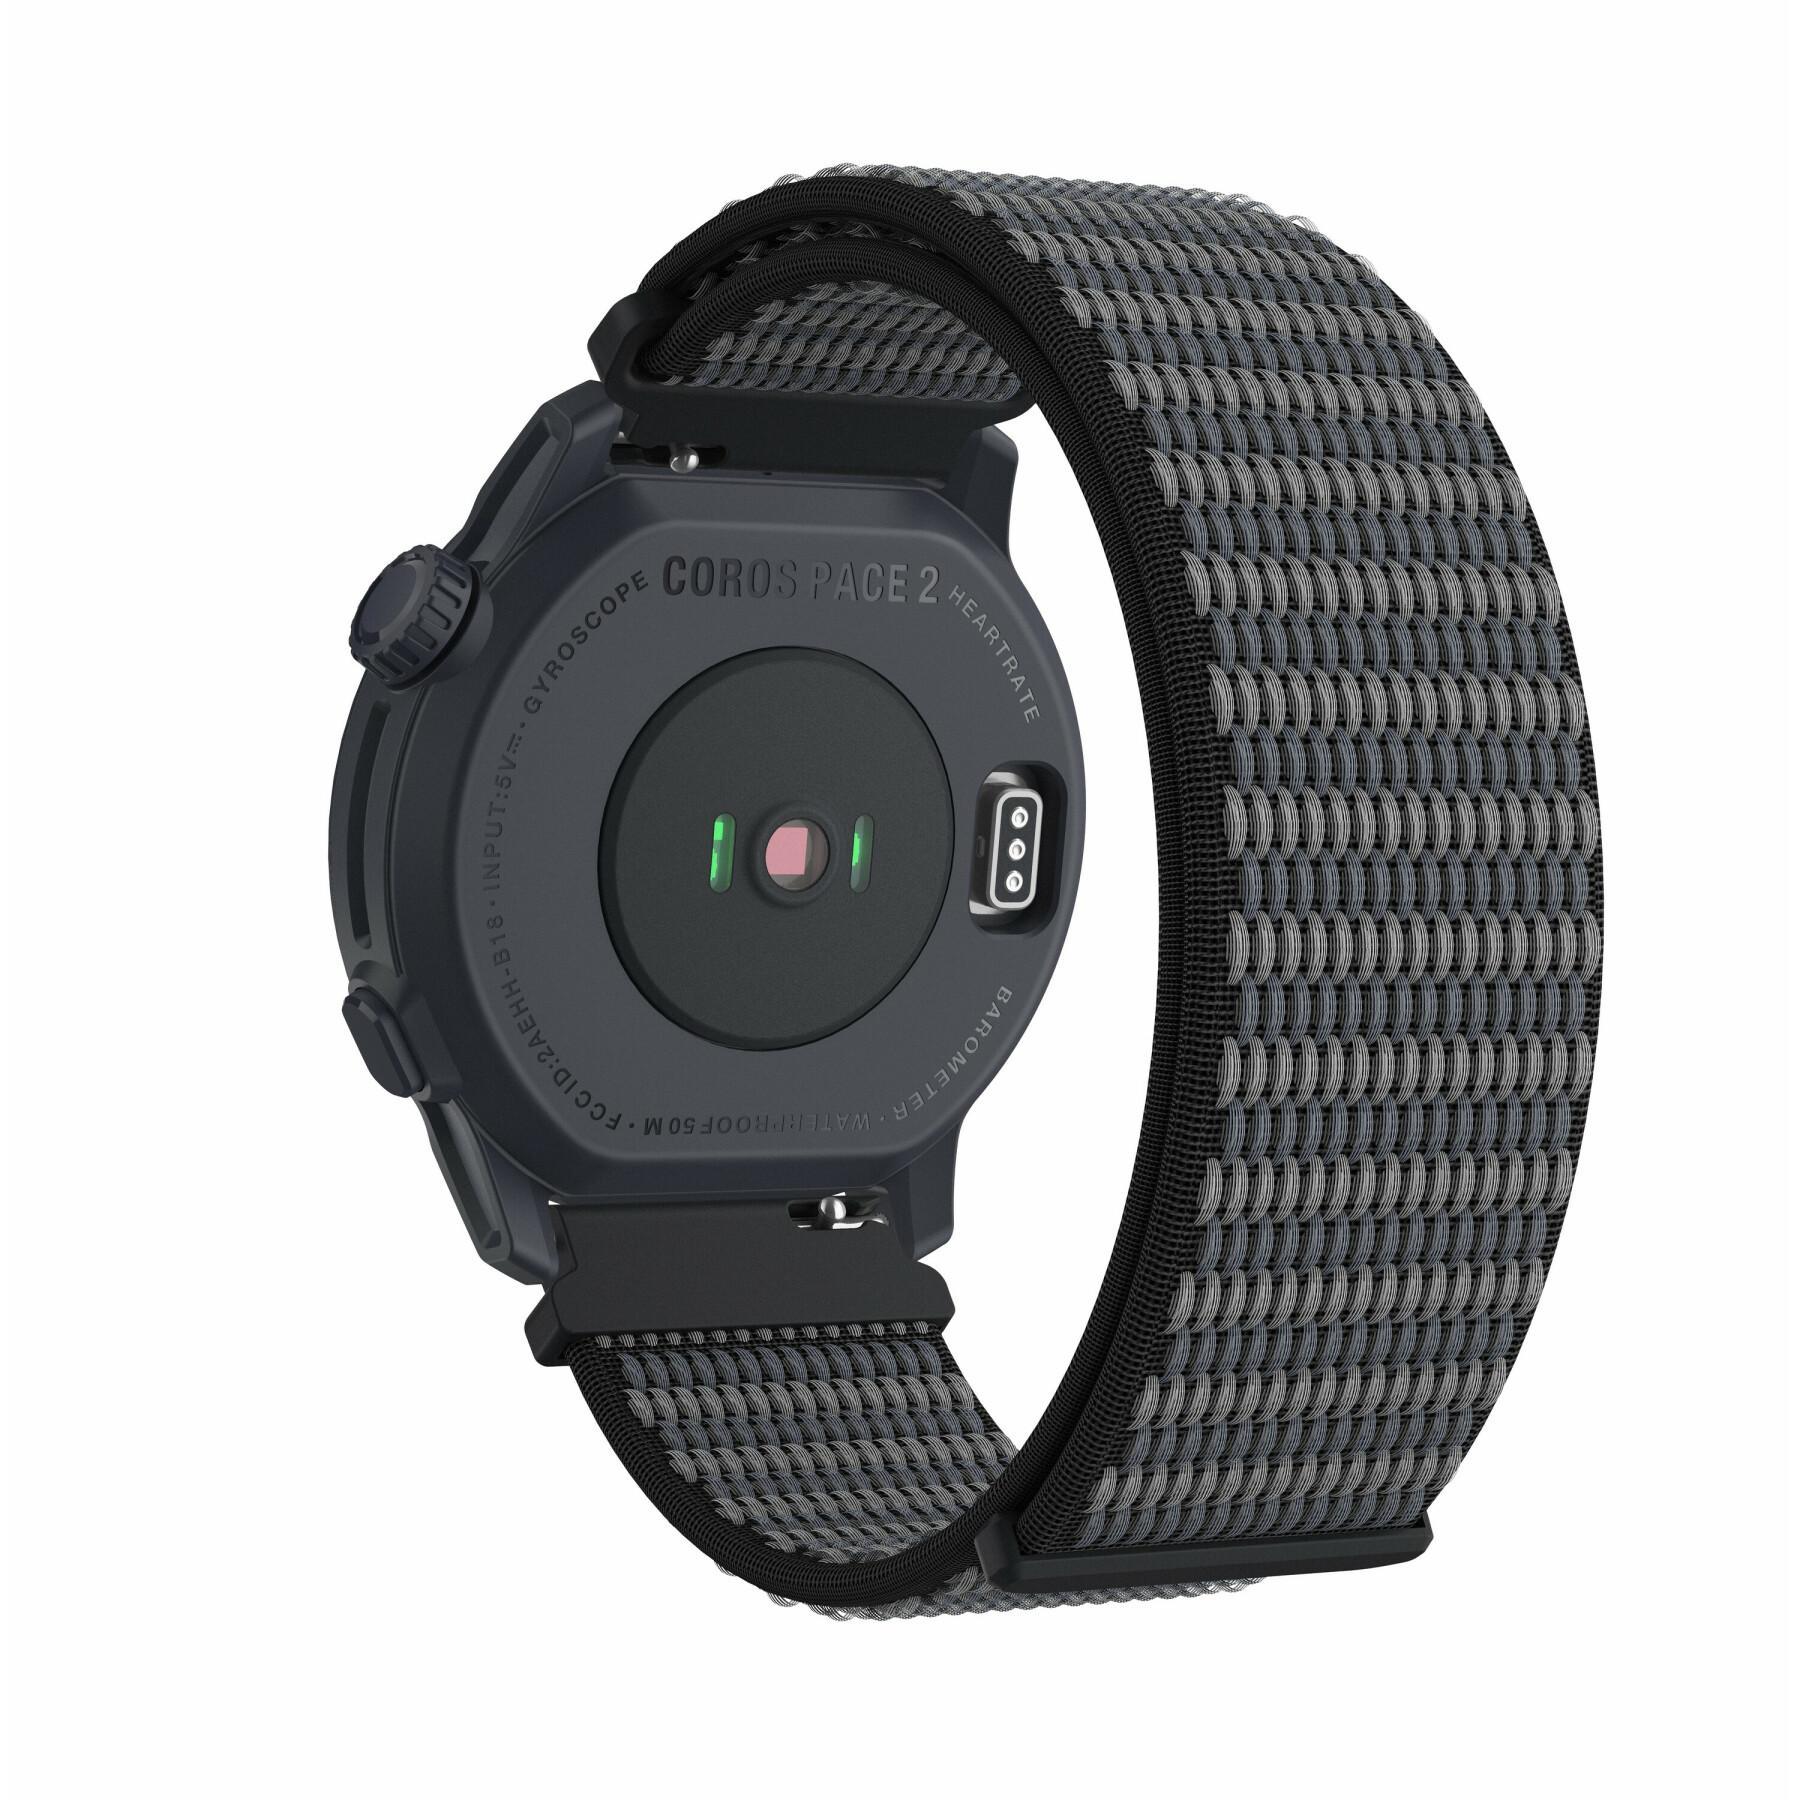 Connected watch with nylon strap Coros Pace 2